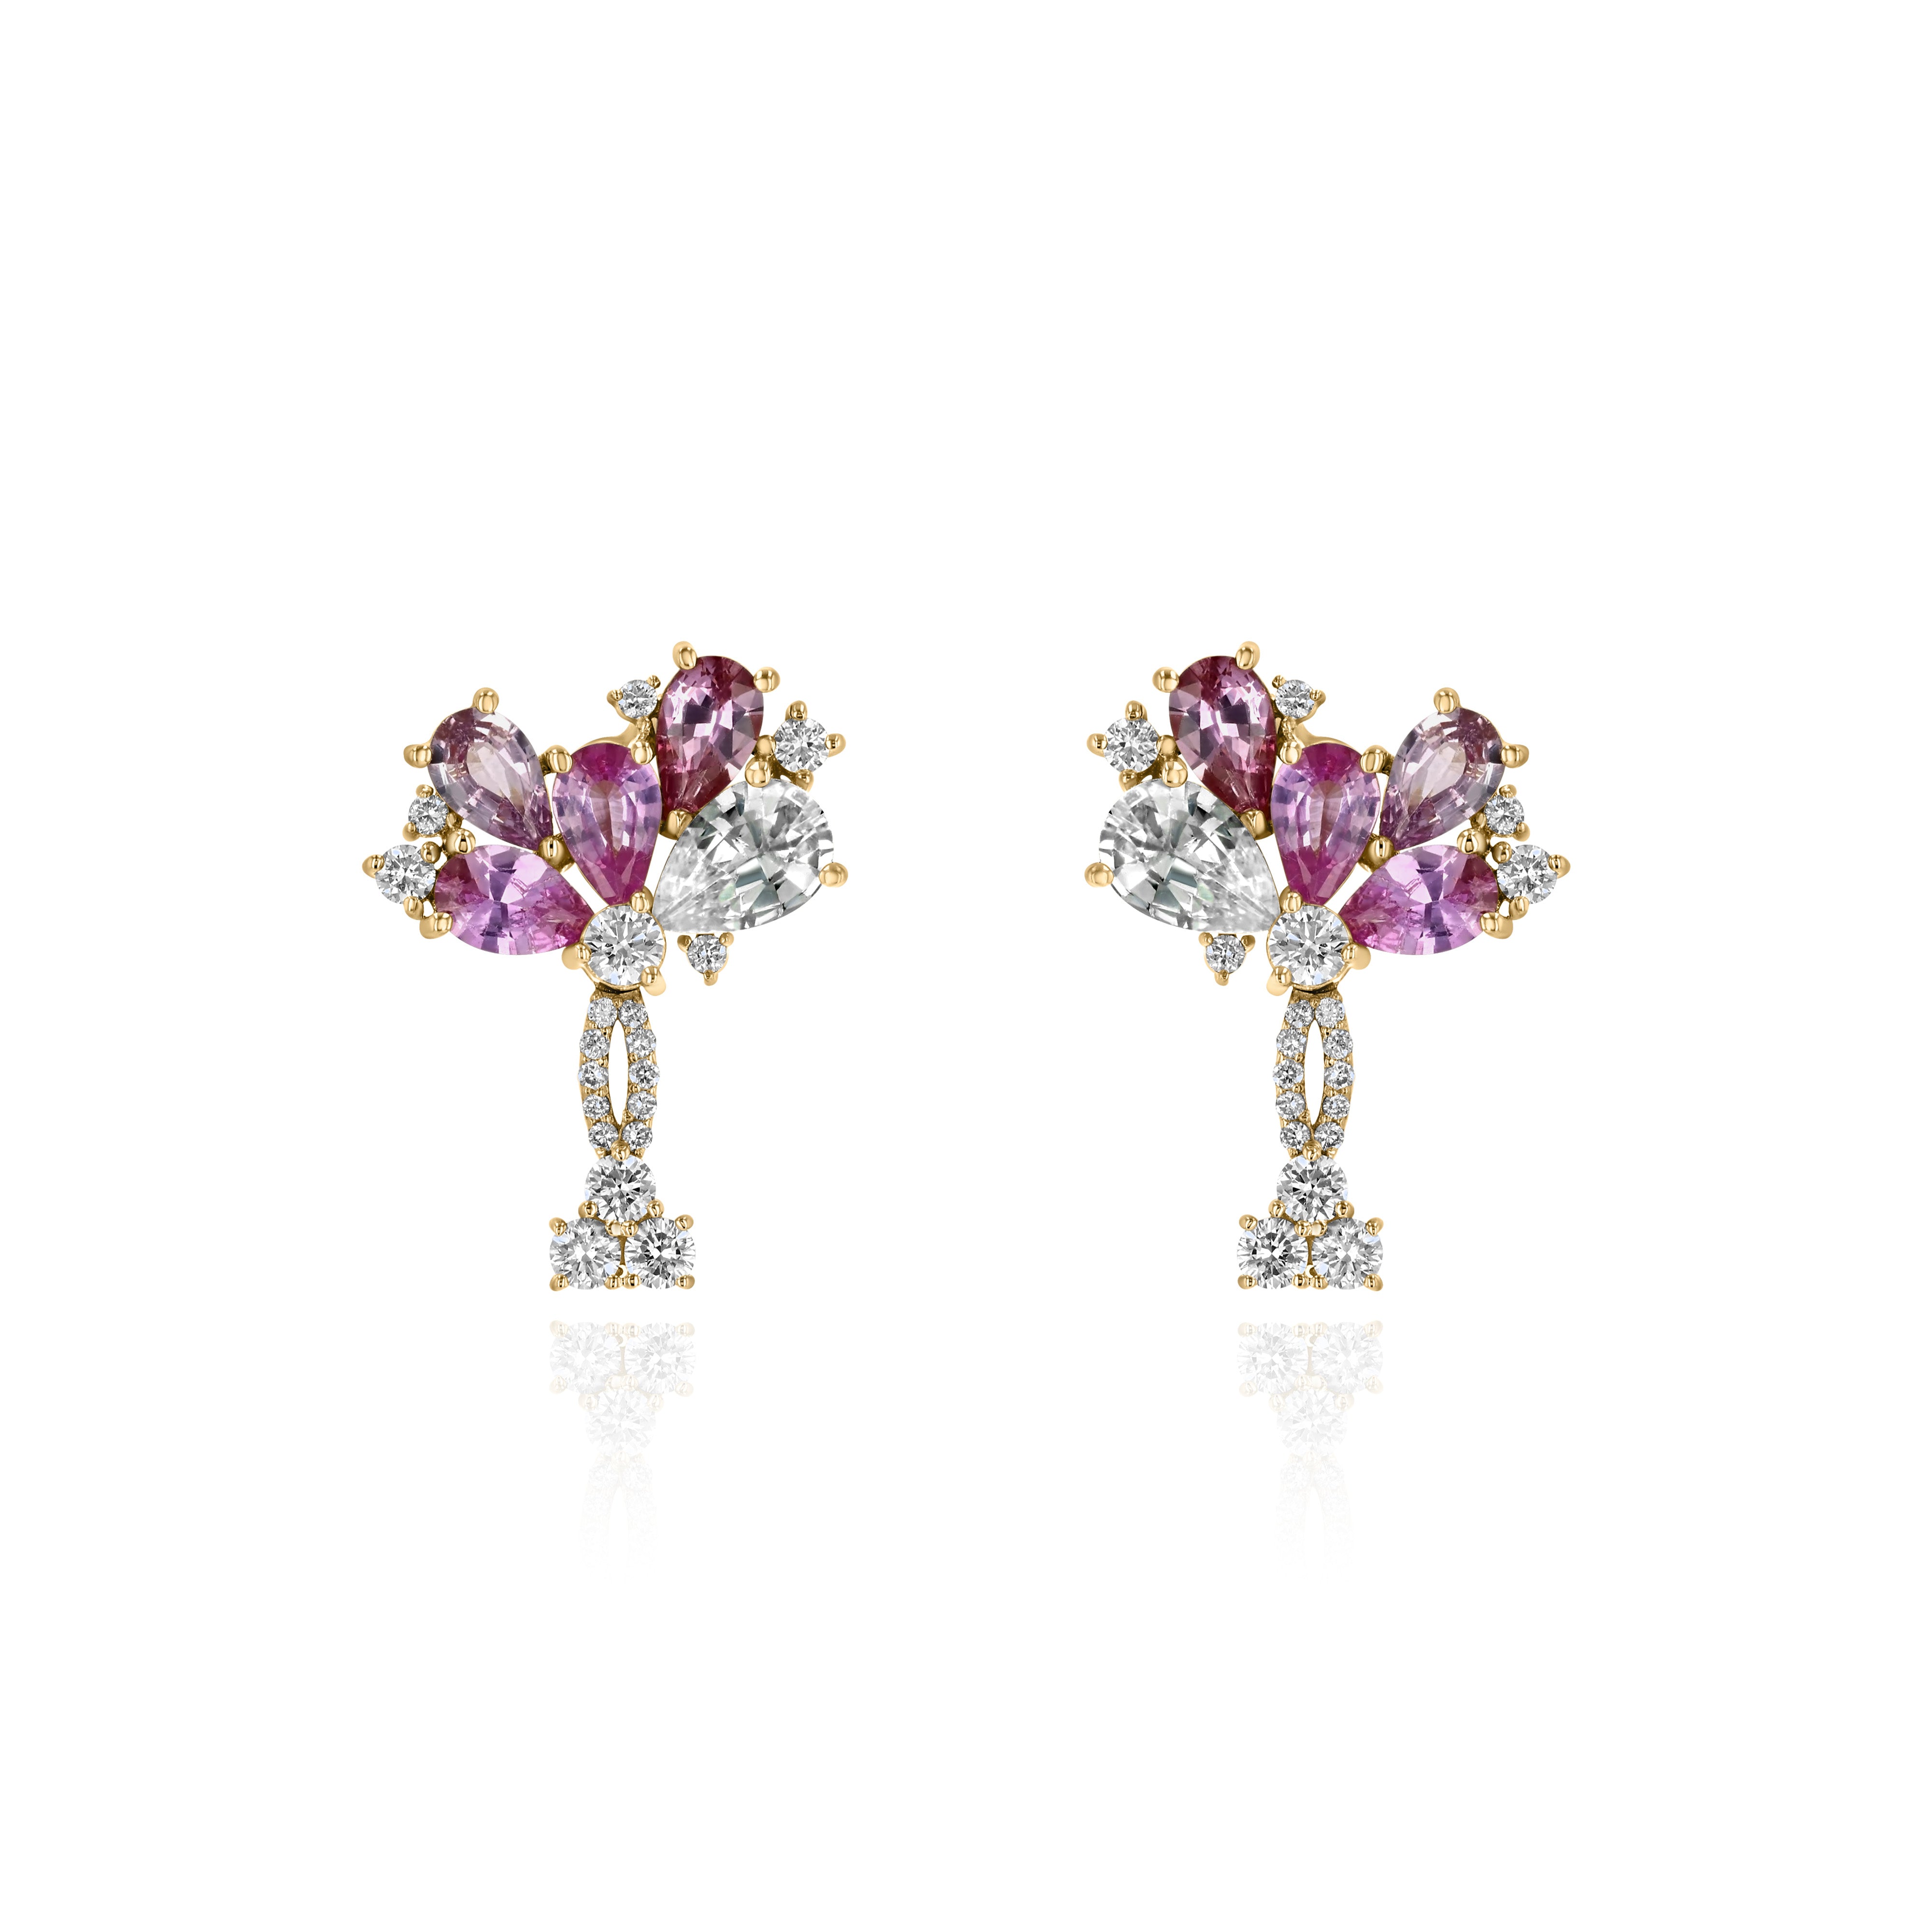 Yellow Gold Earrings with Pink and White Sapphires, and Diamonds, Medium